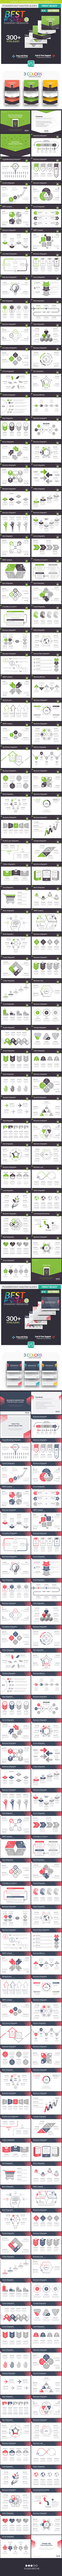 Business 001 - PowerPoint Template